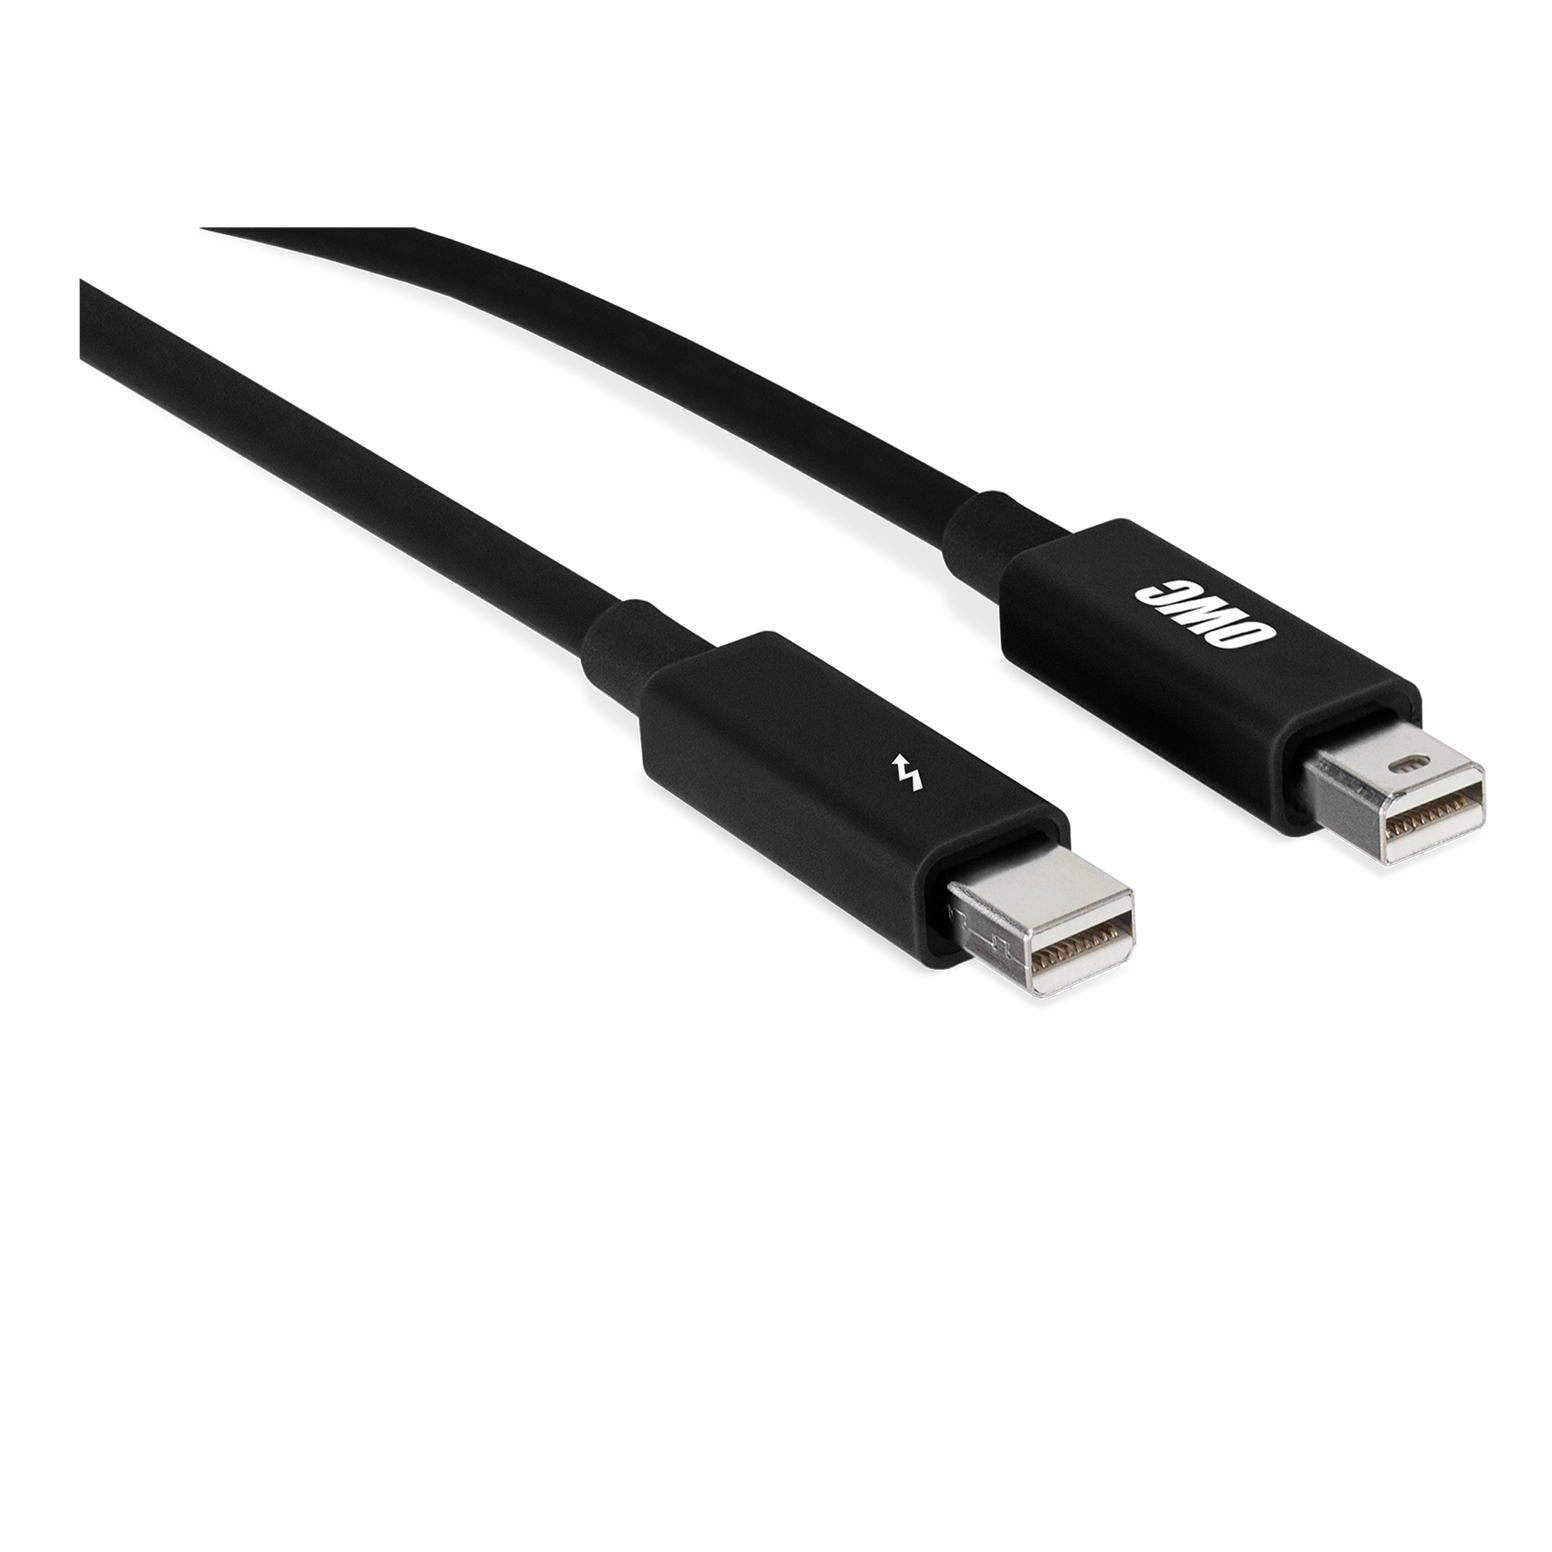 OWC Thunderbolt 1 & 2 Cable (1.0 m) - Black - Discontinued